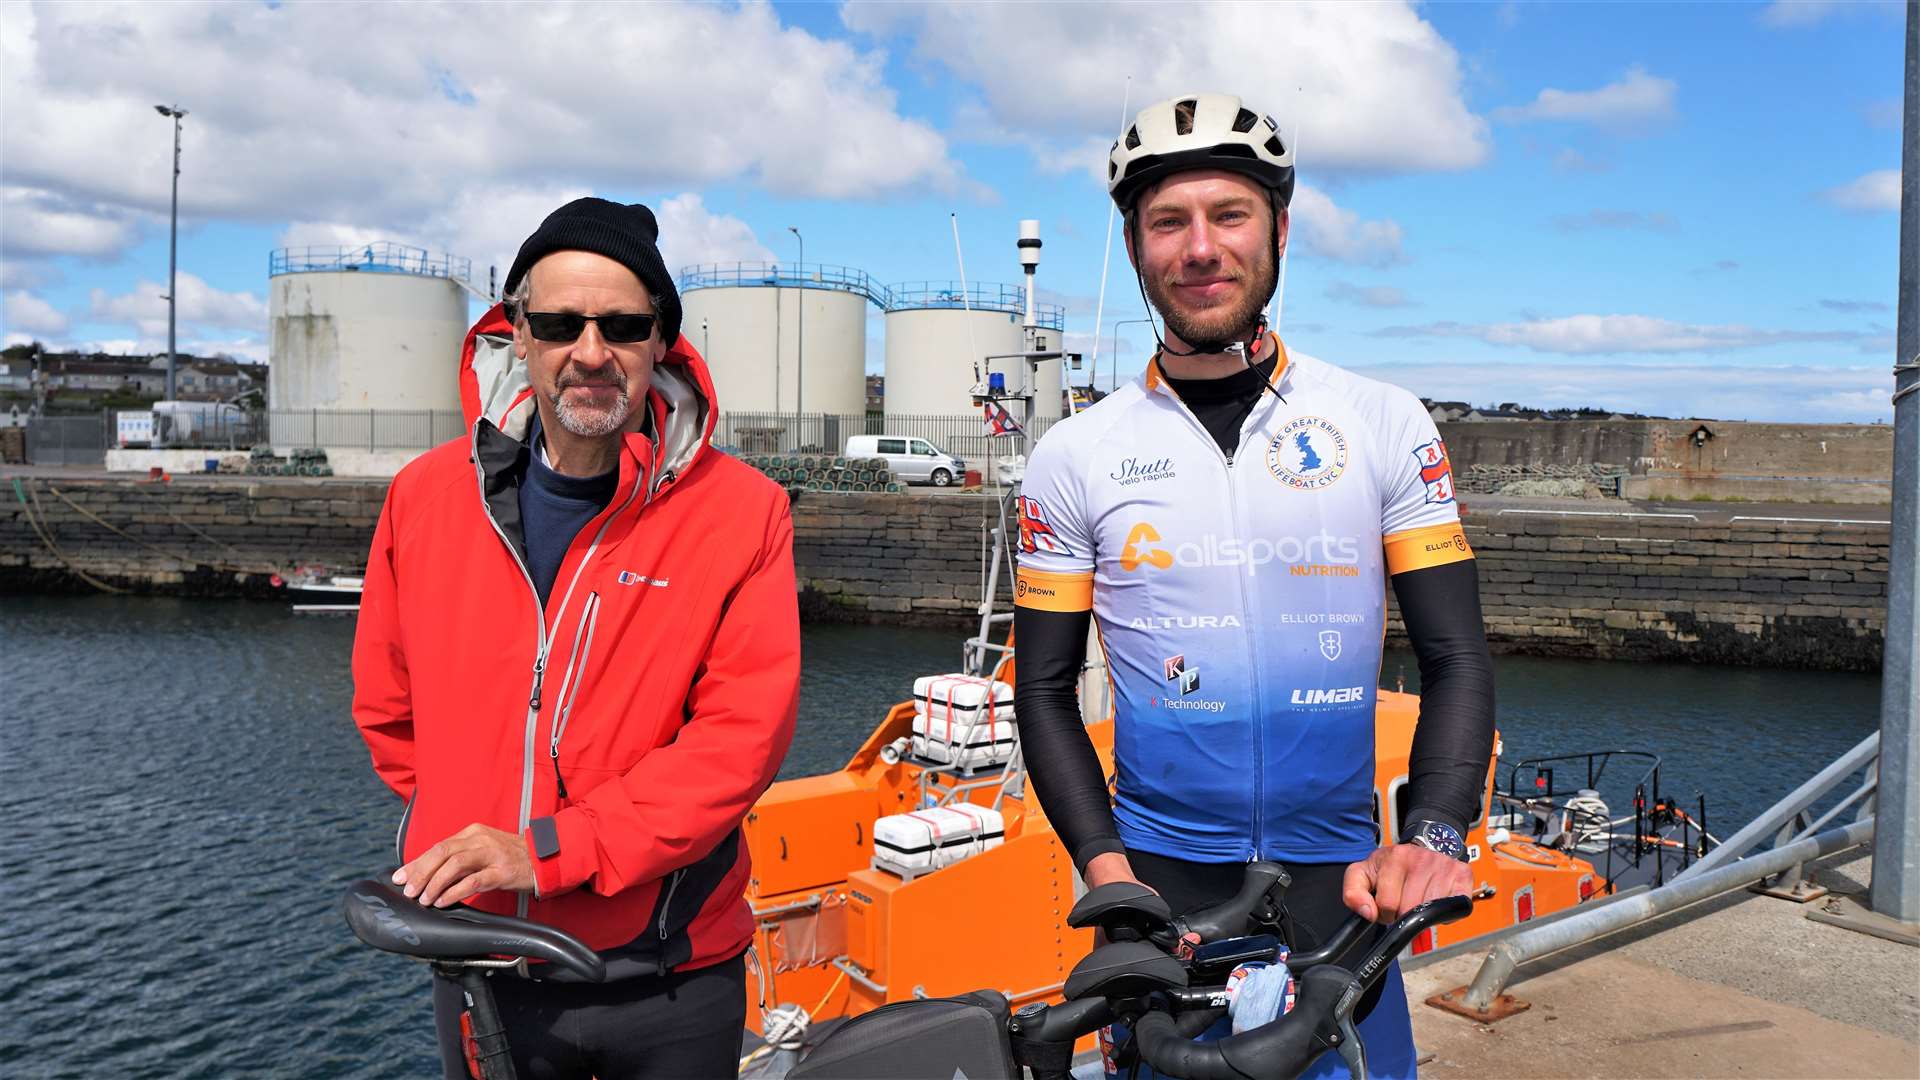 Professor Iain Baikie, left, with Harry Lidgley at Wick harbour on Saturday morning. The Wick scientist's company logo – KP Technology – is on Harry's shirt as one of the main sponsors. Picture: DGS